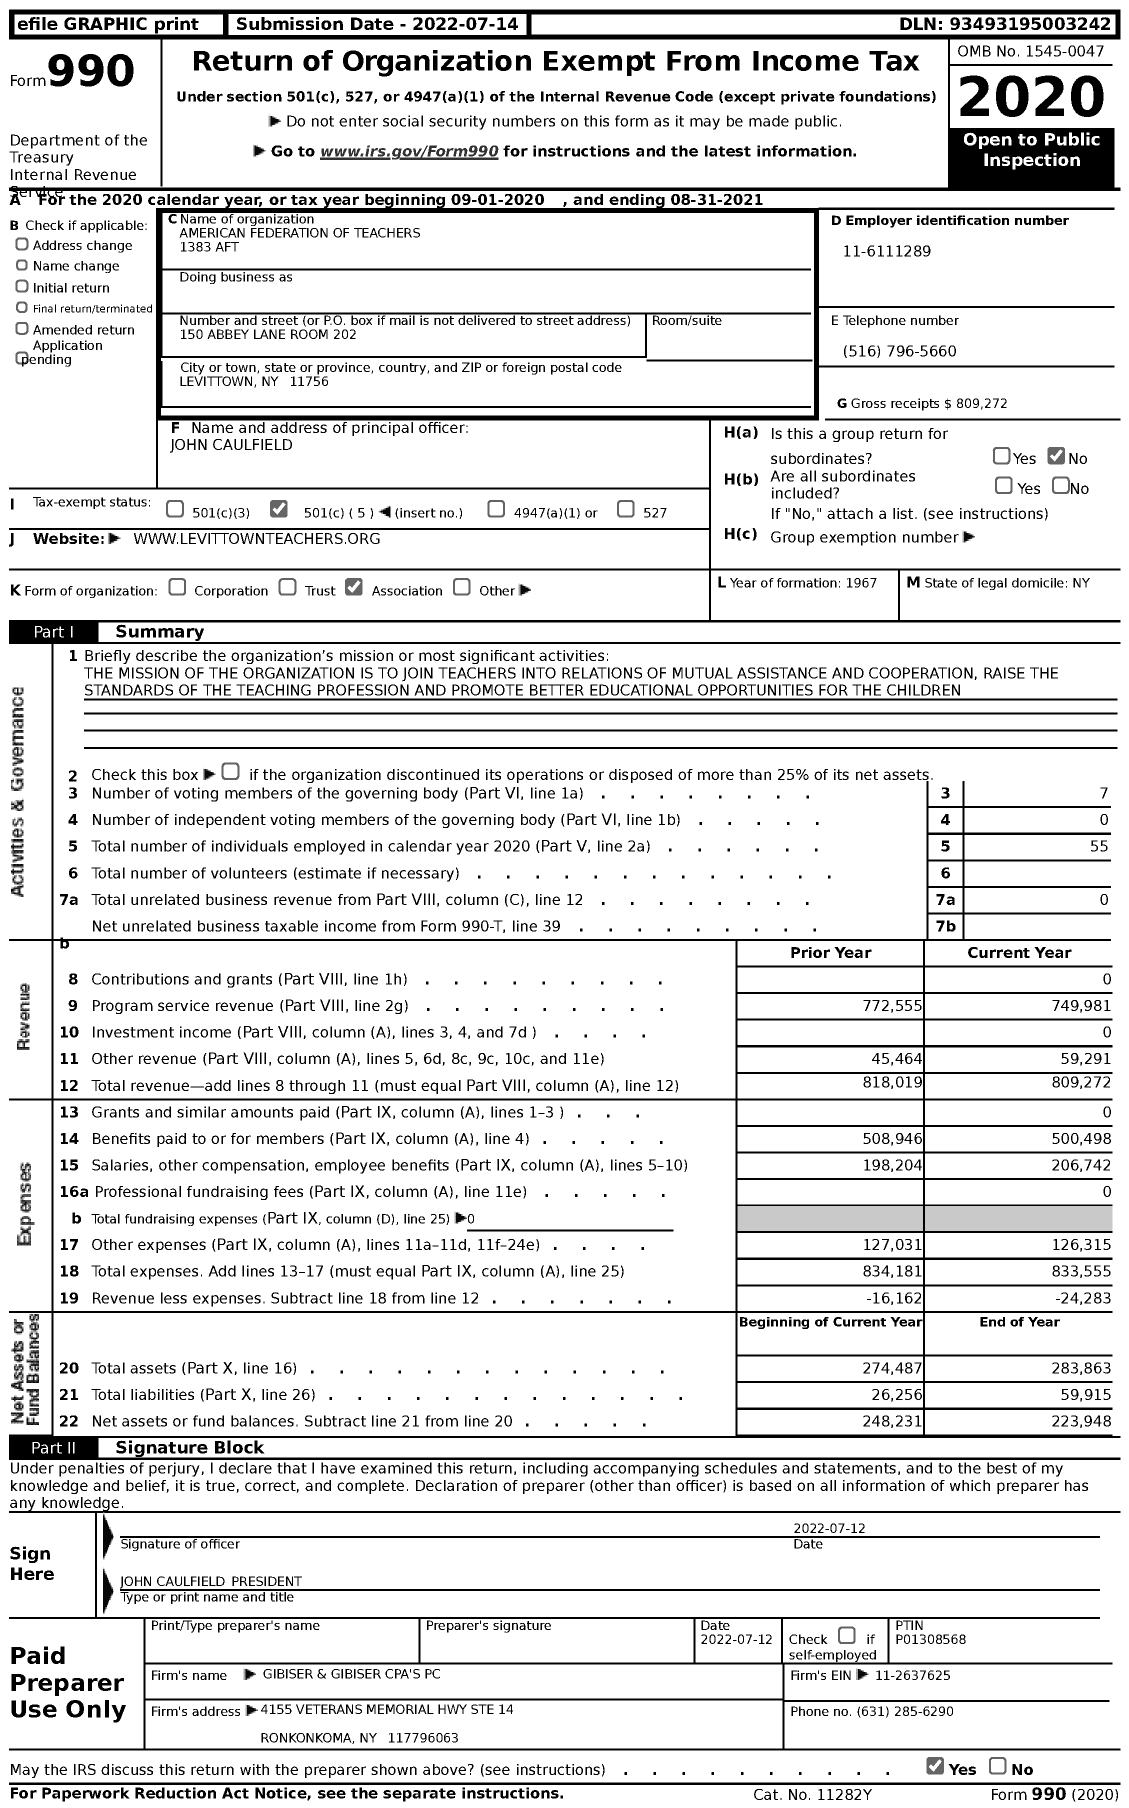 Image of first page of 2020 Form 990 for American Federation of Teachers 1383 (AFT)